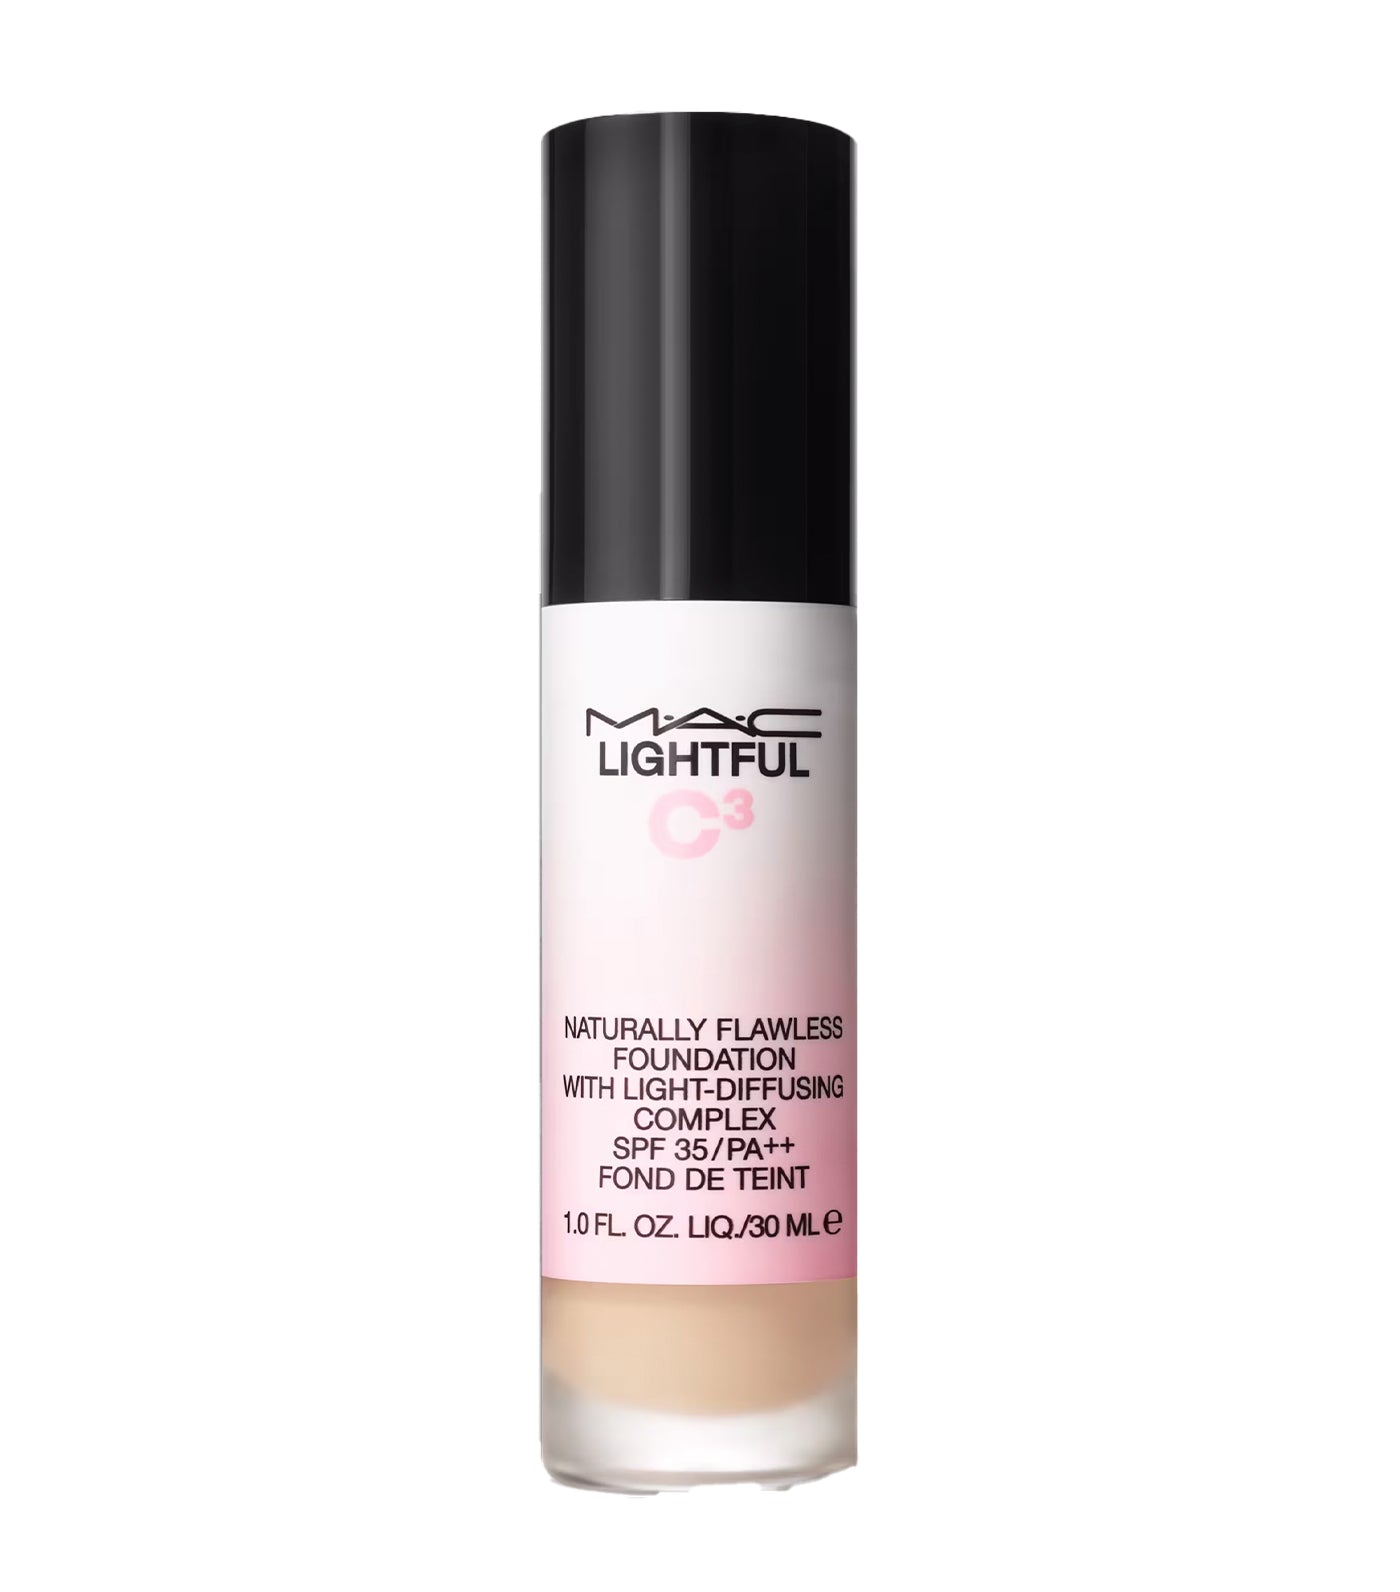 Lightful C³ Naturally Flawless Foundation with Light-diffusing Complex SPF 35/PA++